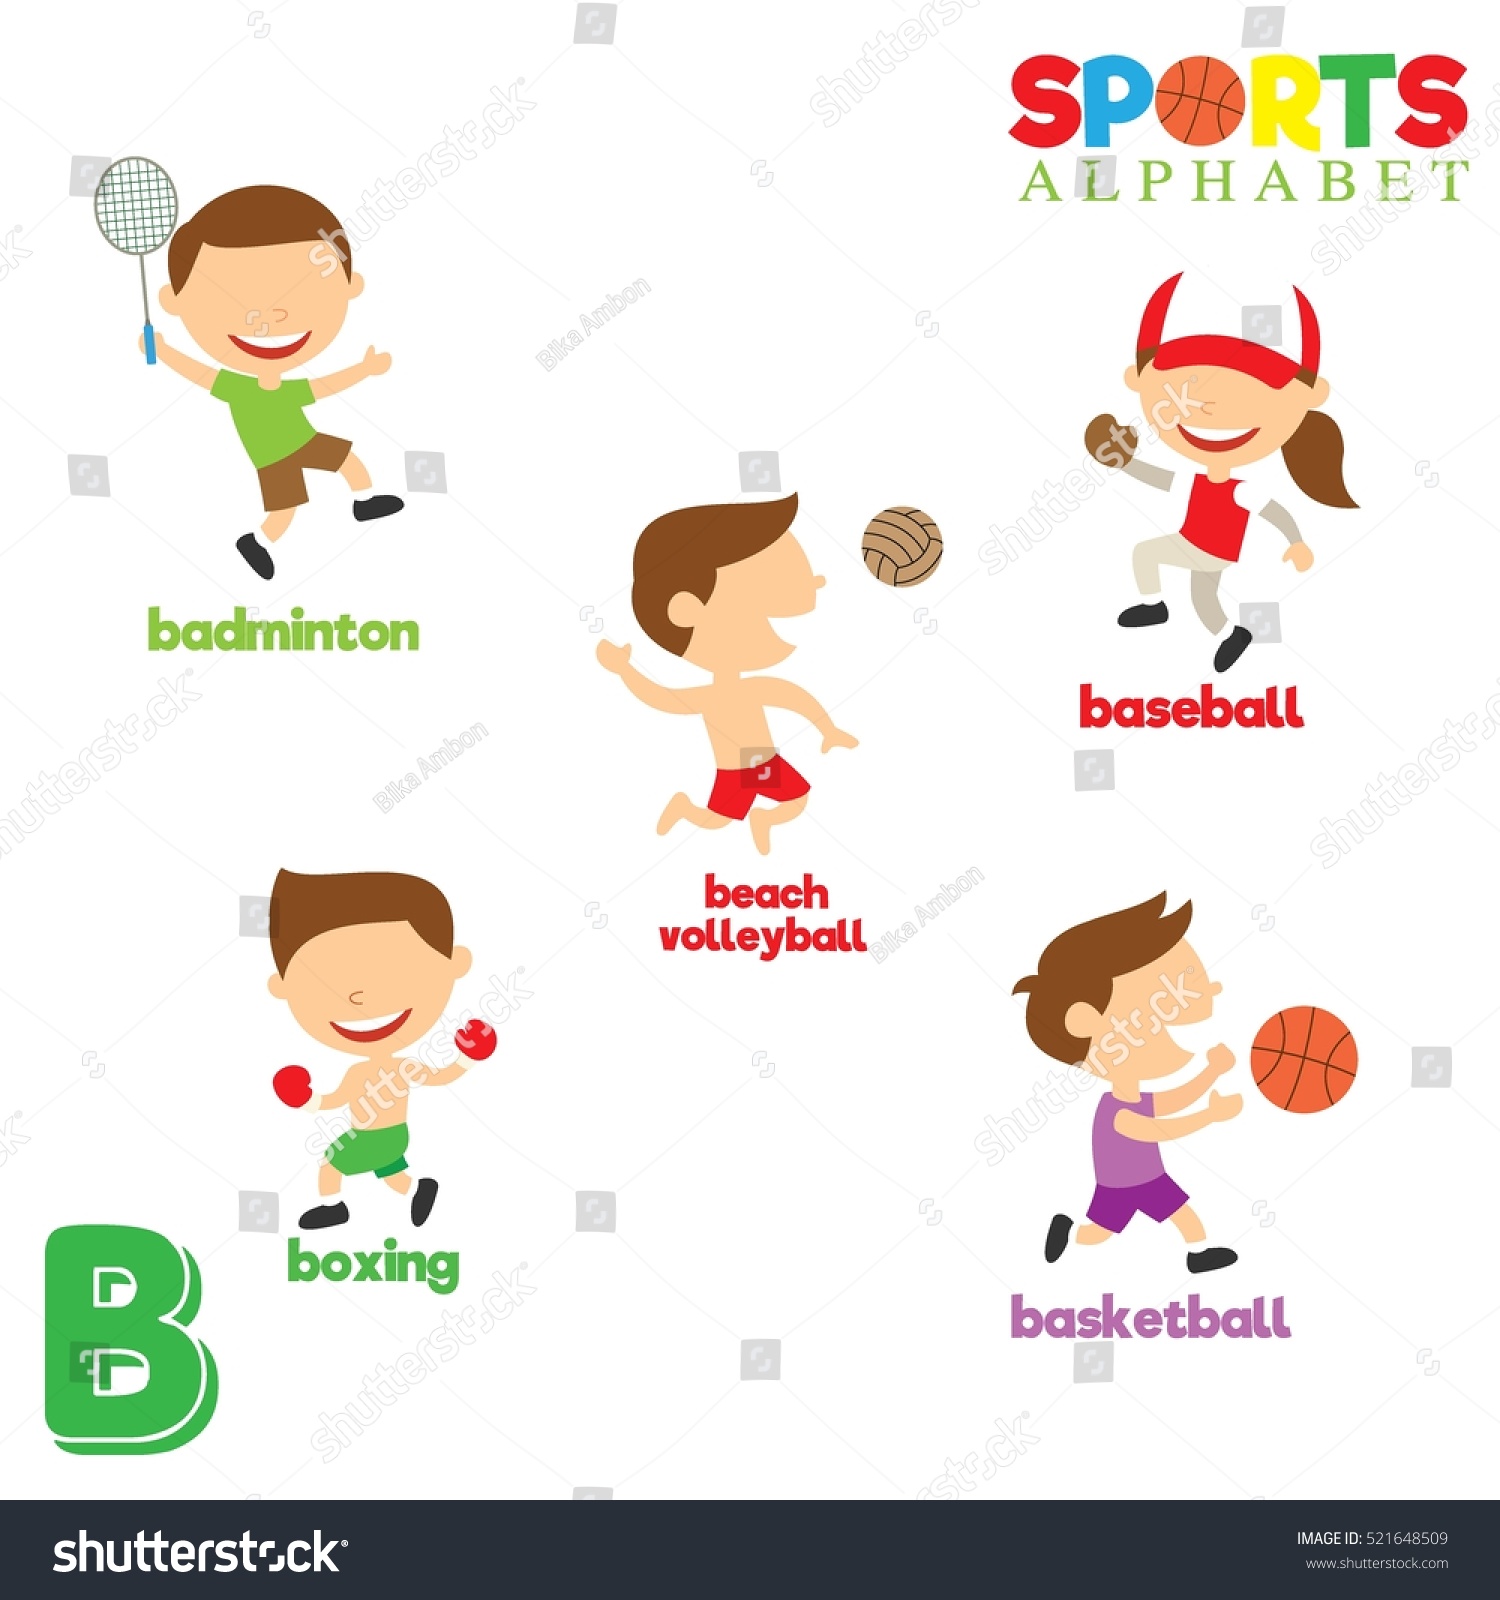 Sports with b